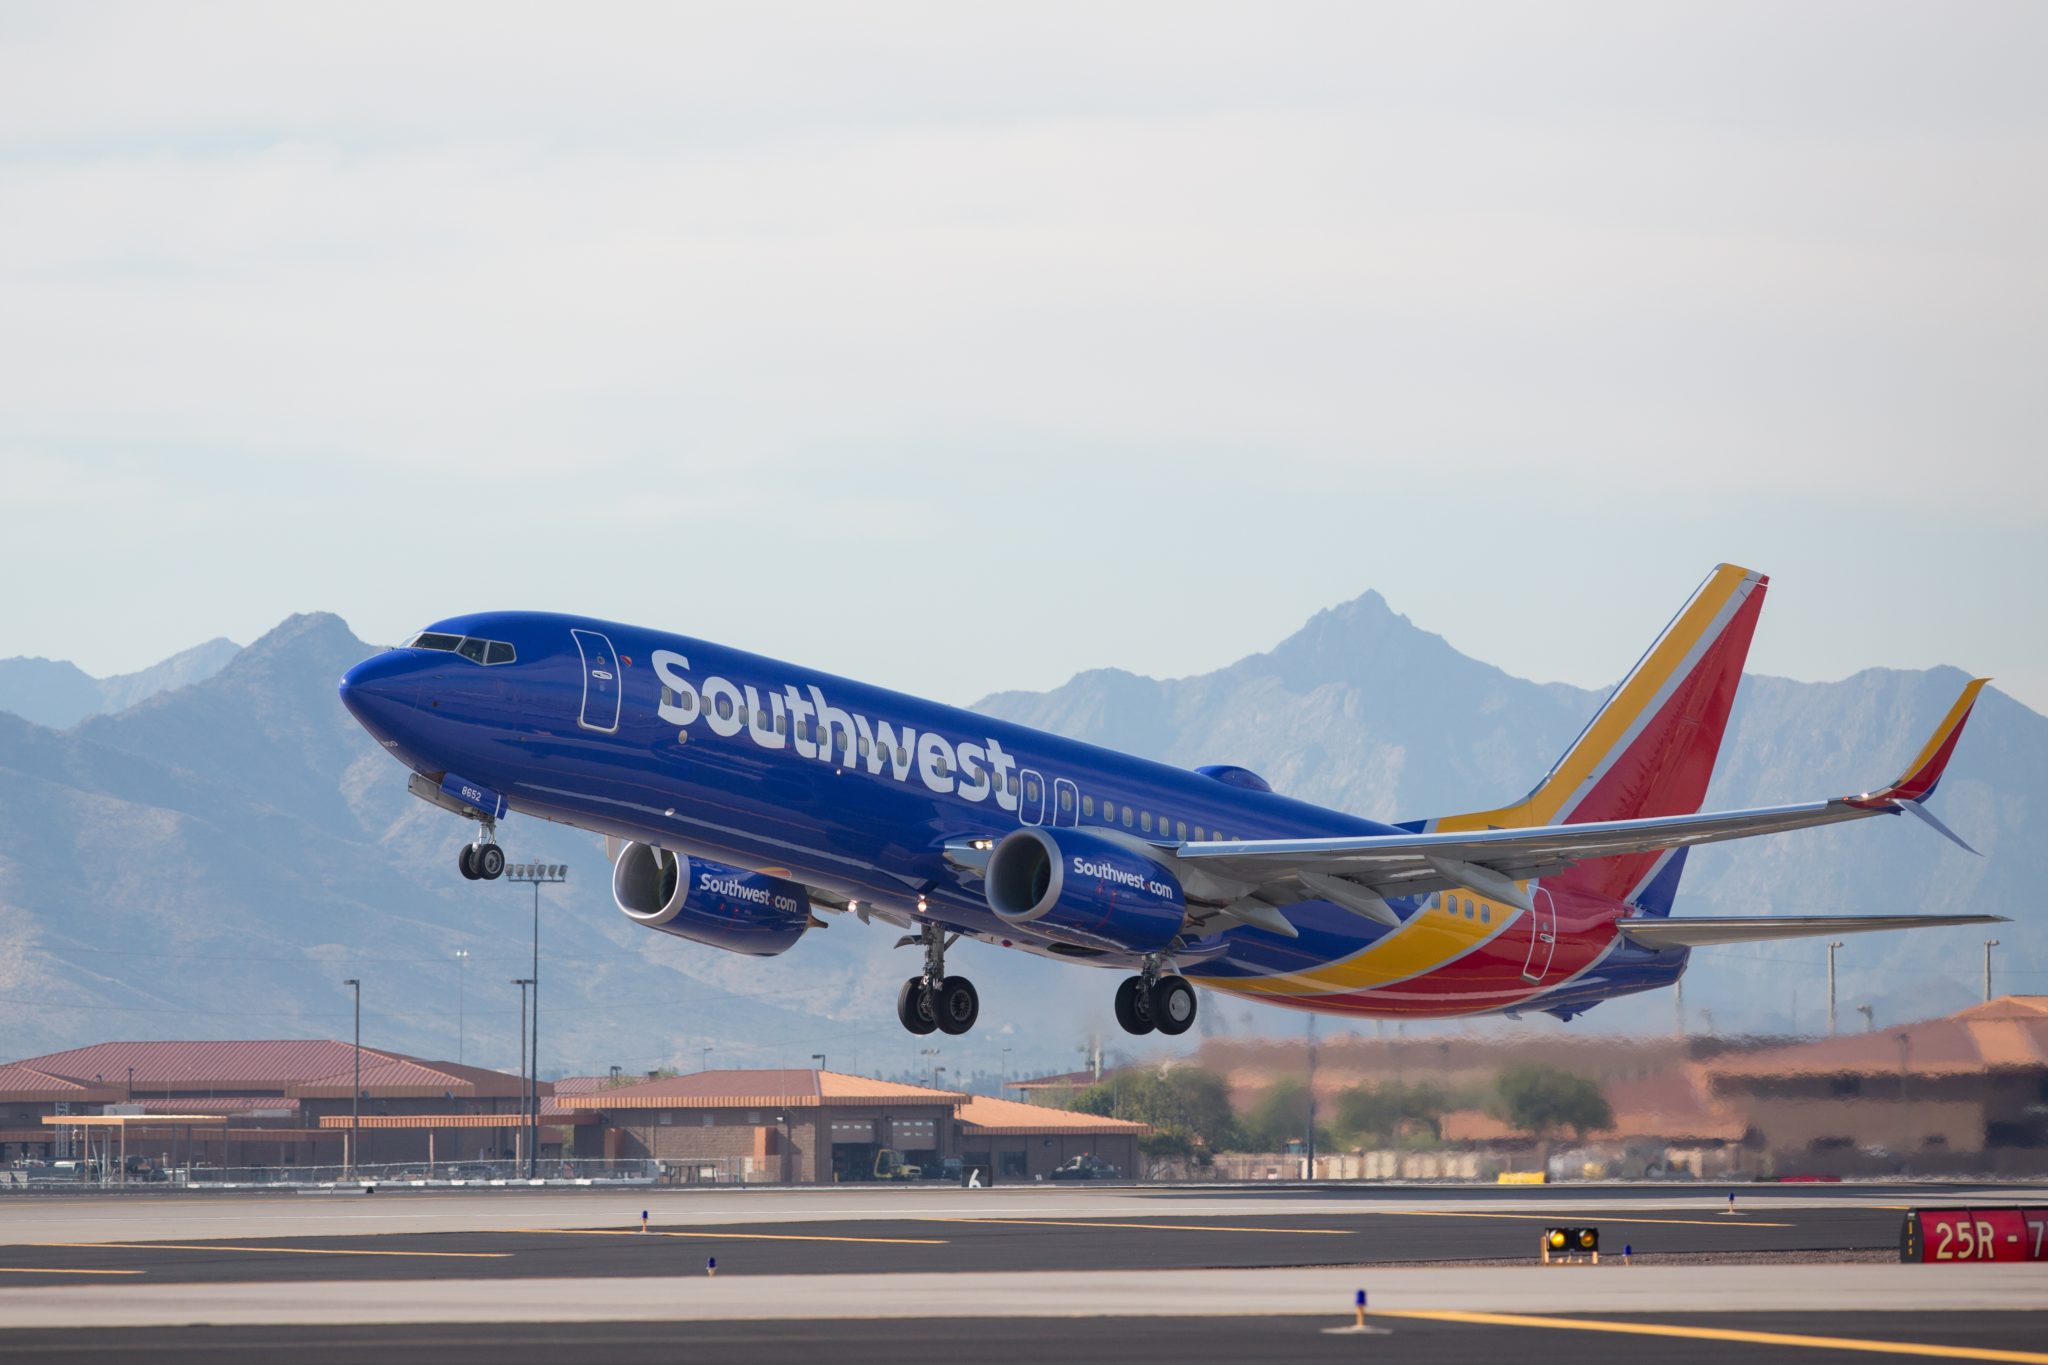 A Southwest Airlines Boeing 737 Takes Off